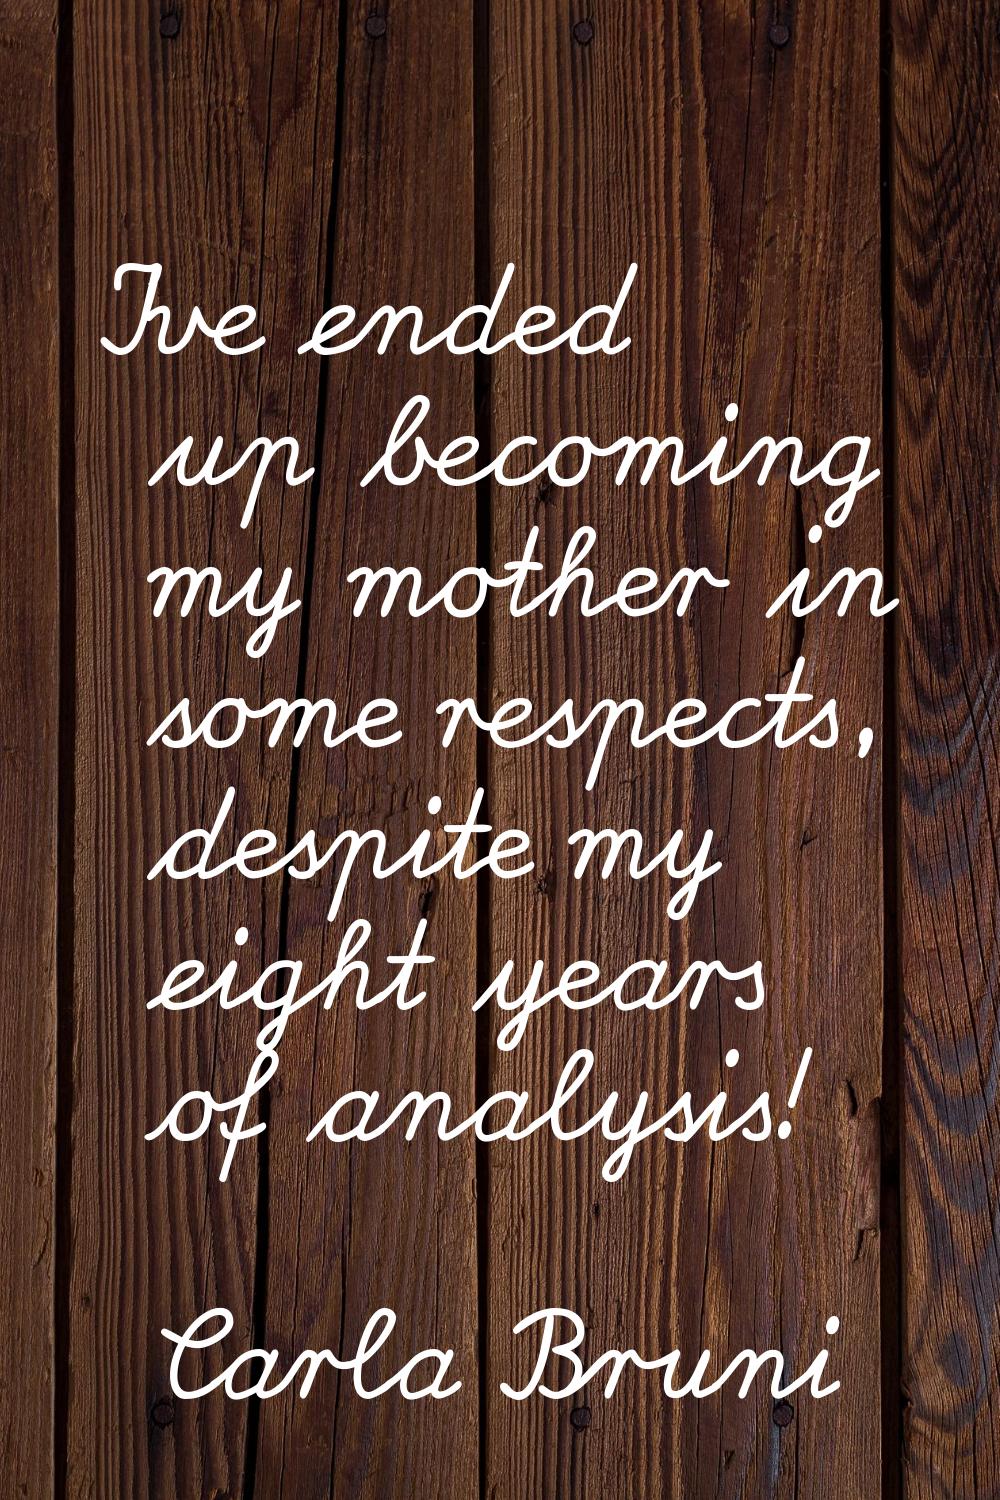 I've ended up becoming my mother in some respects, despite my eight years of analysis!